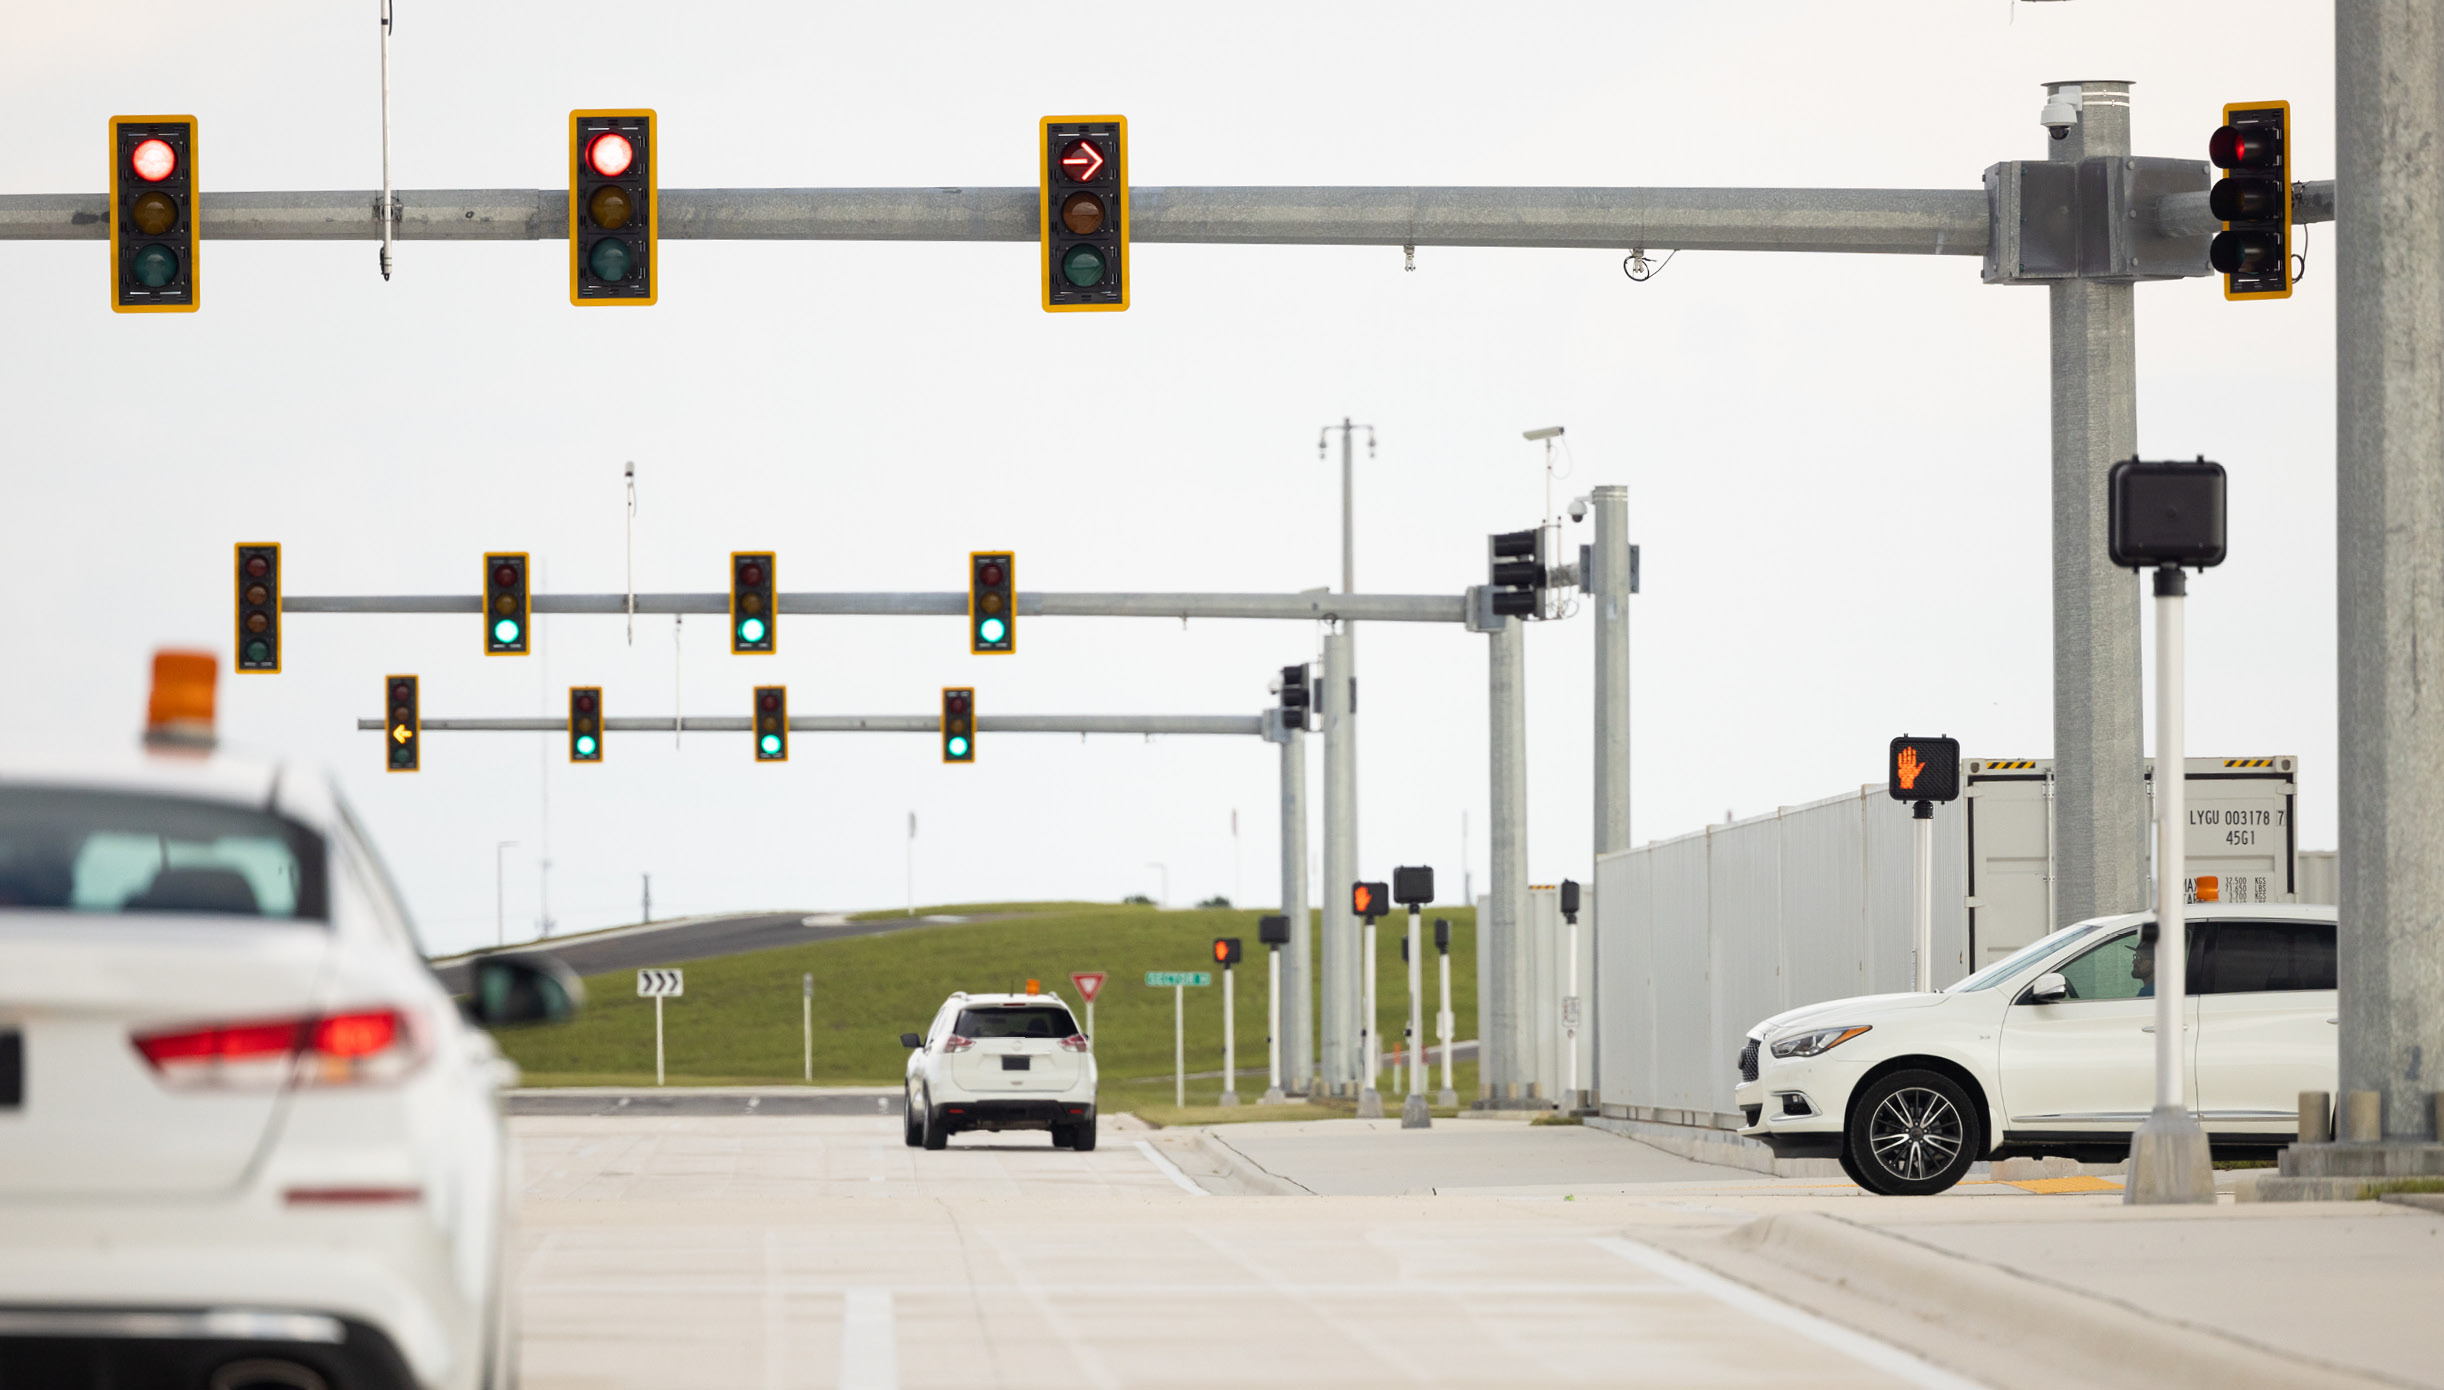 The sequential layout of three traffic signals with vehicles driving along the roadways